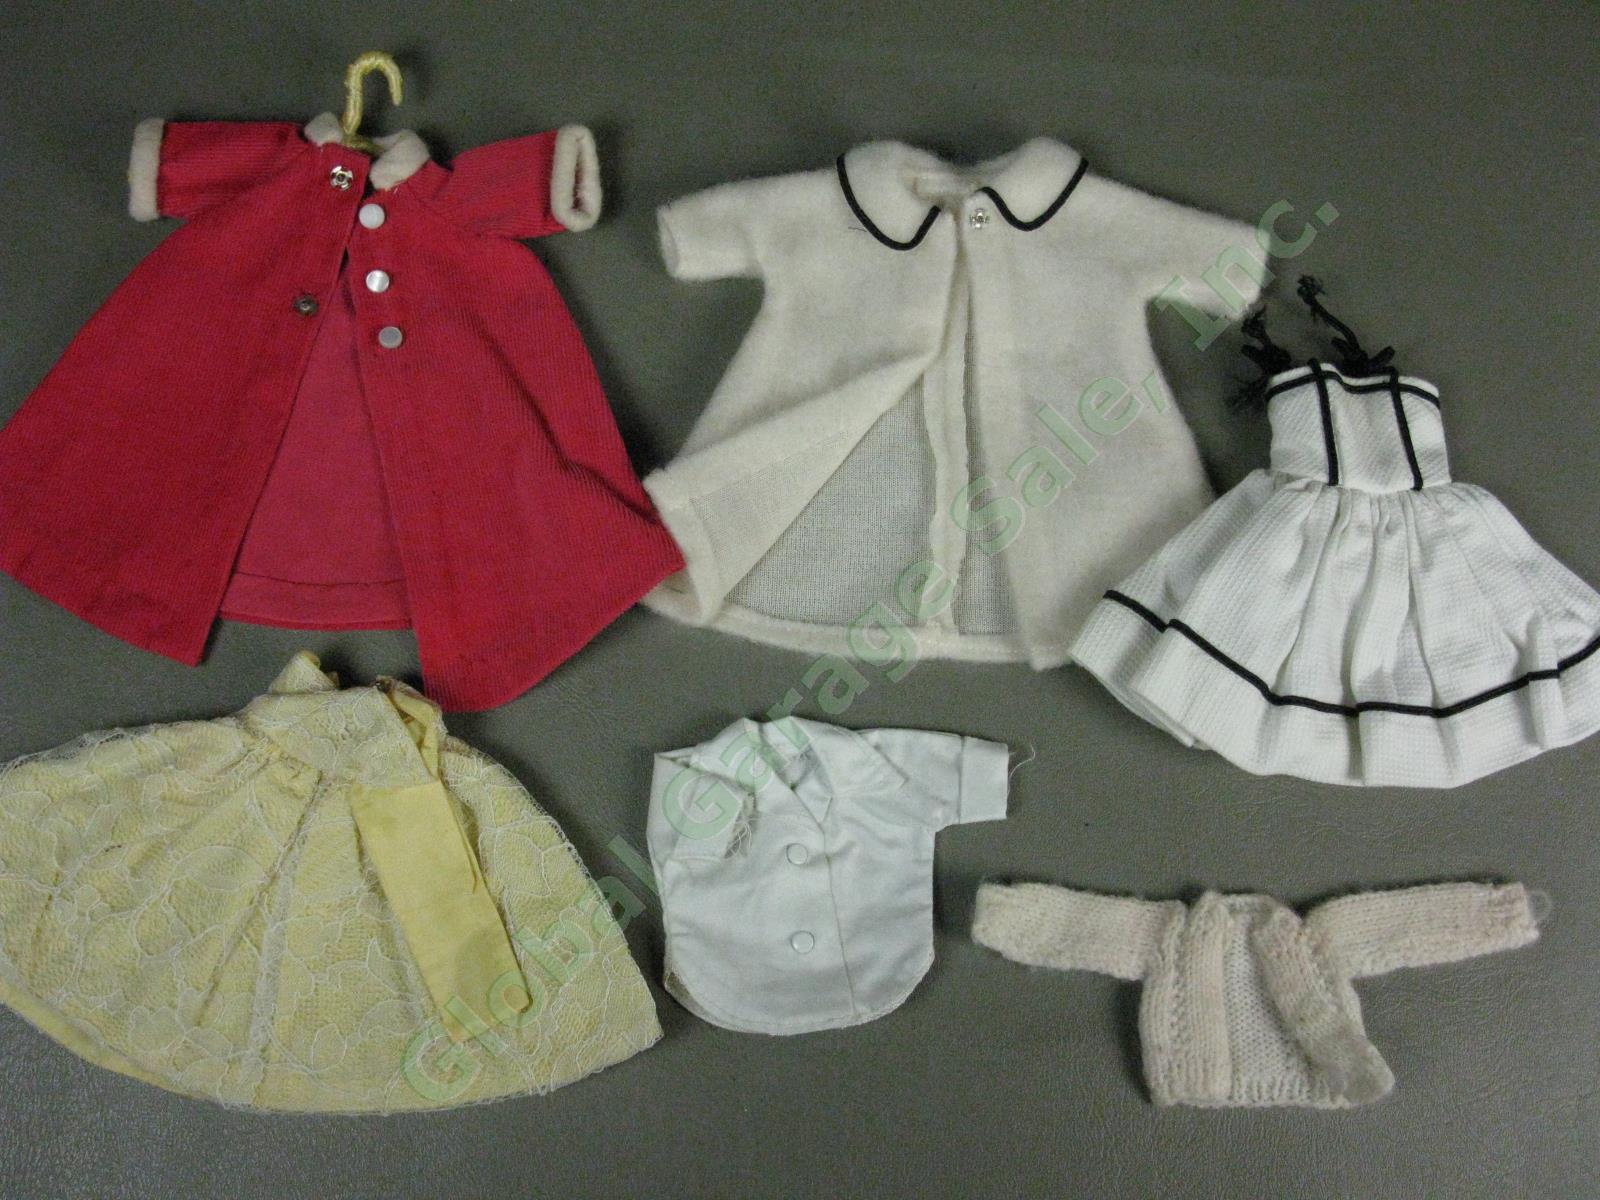 Huge Vintage 1950s Vogue Jill Doll Clothing Jewelry Accessories Collection Lot 14